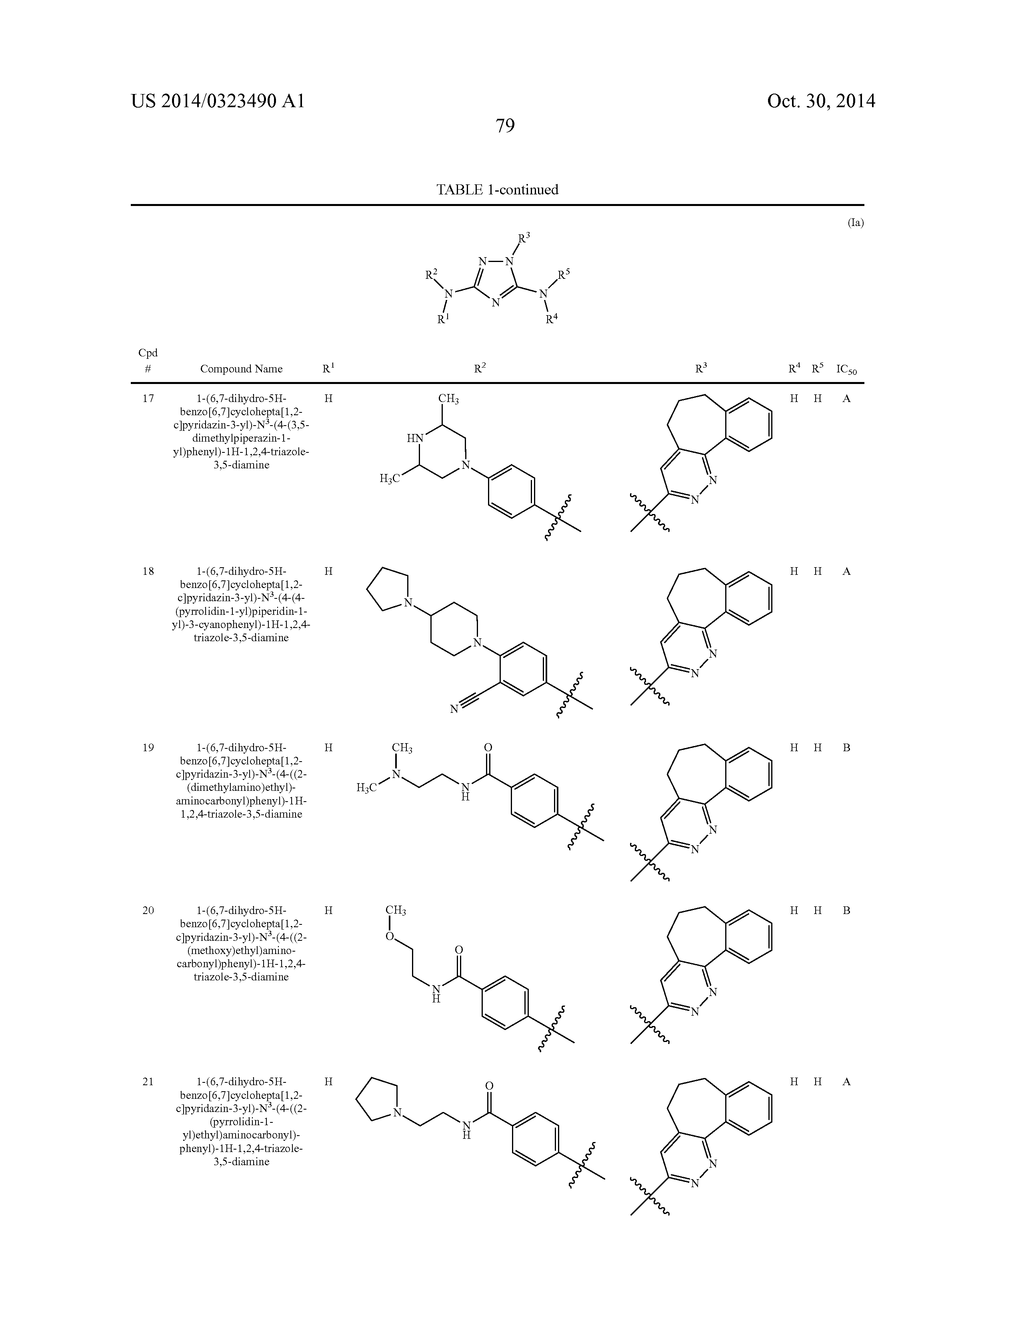 POLYCYCLIC HETEROARYL SUBSTITUTED TRIAZOLES USEFUL AS AXL INHIBITORS - diagram, schematic, and image 80